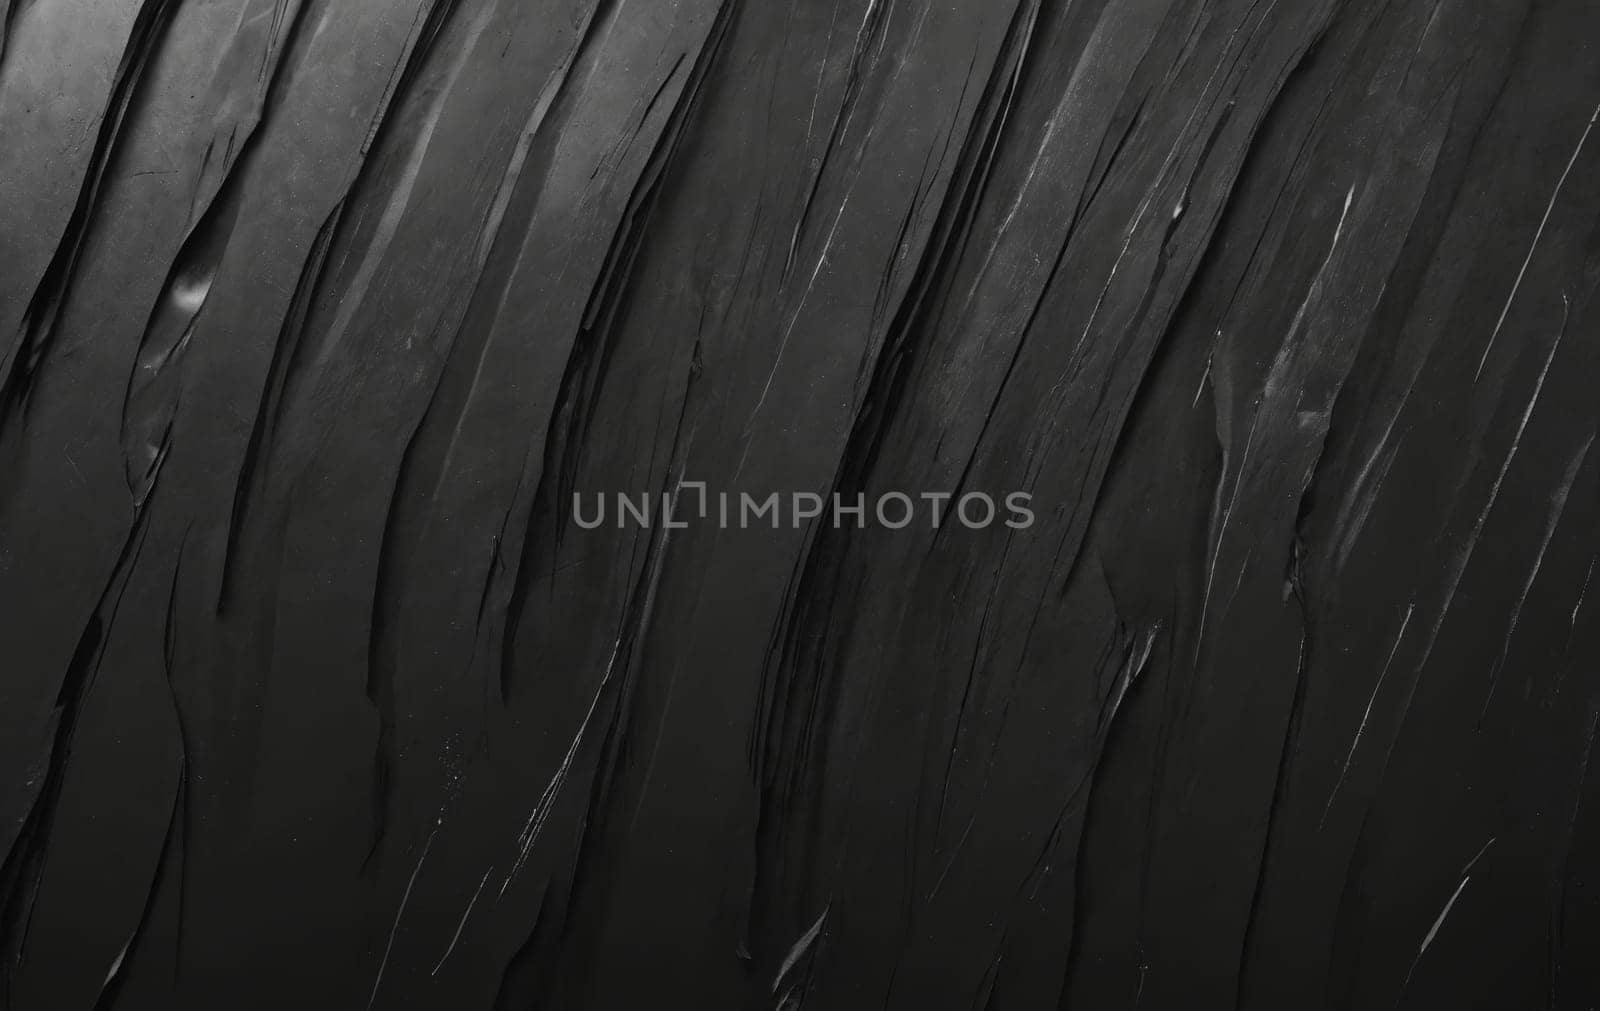 Detailed image showcasing a black feather texture on a dark background by Andre1ns